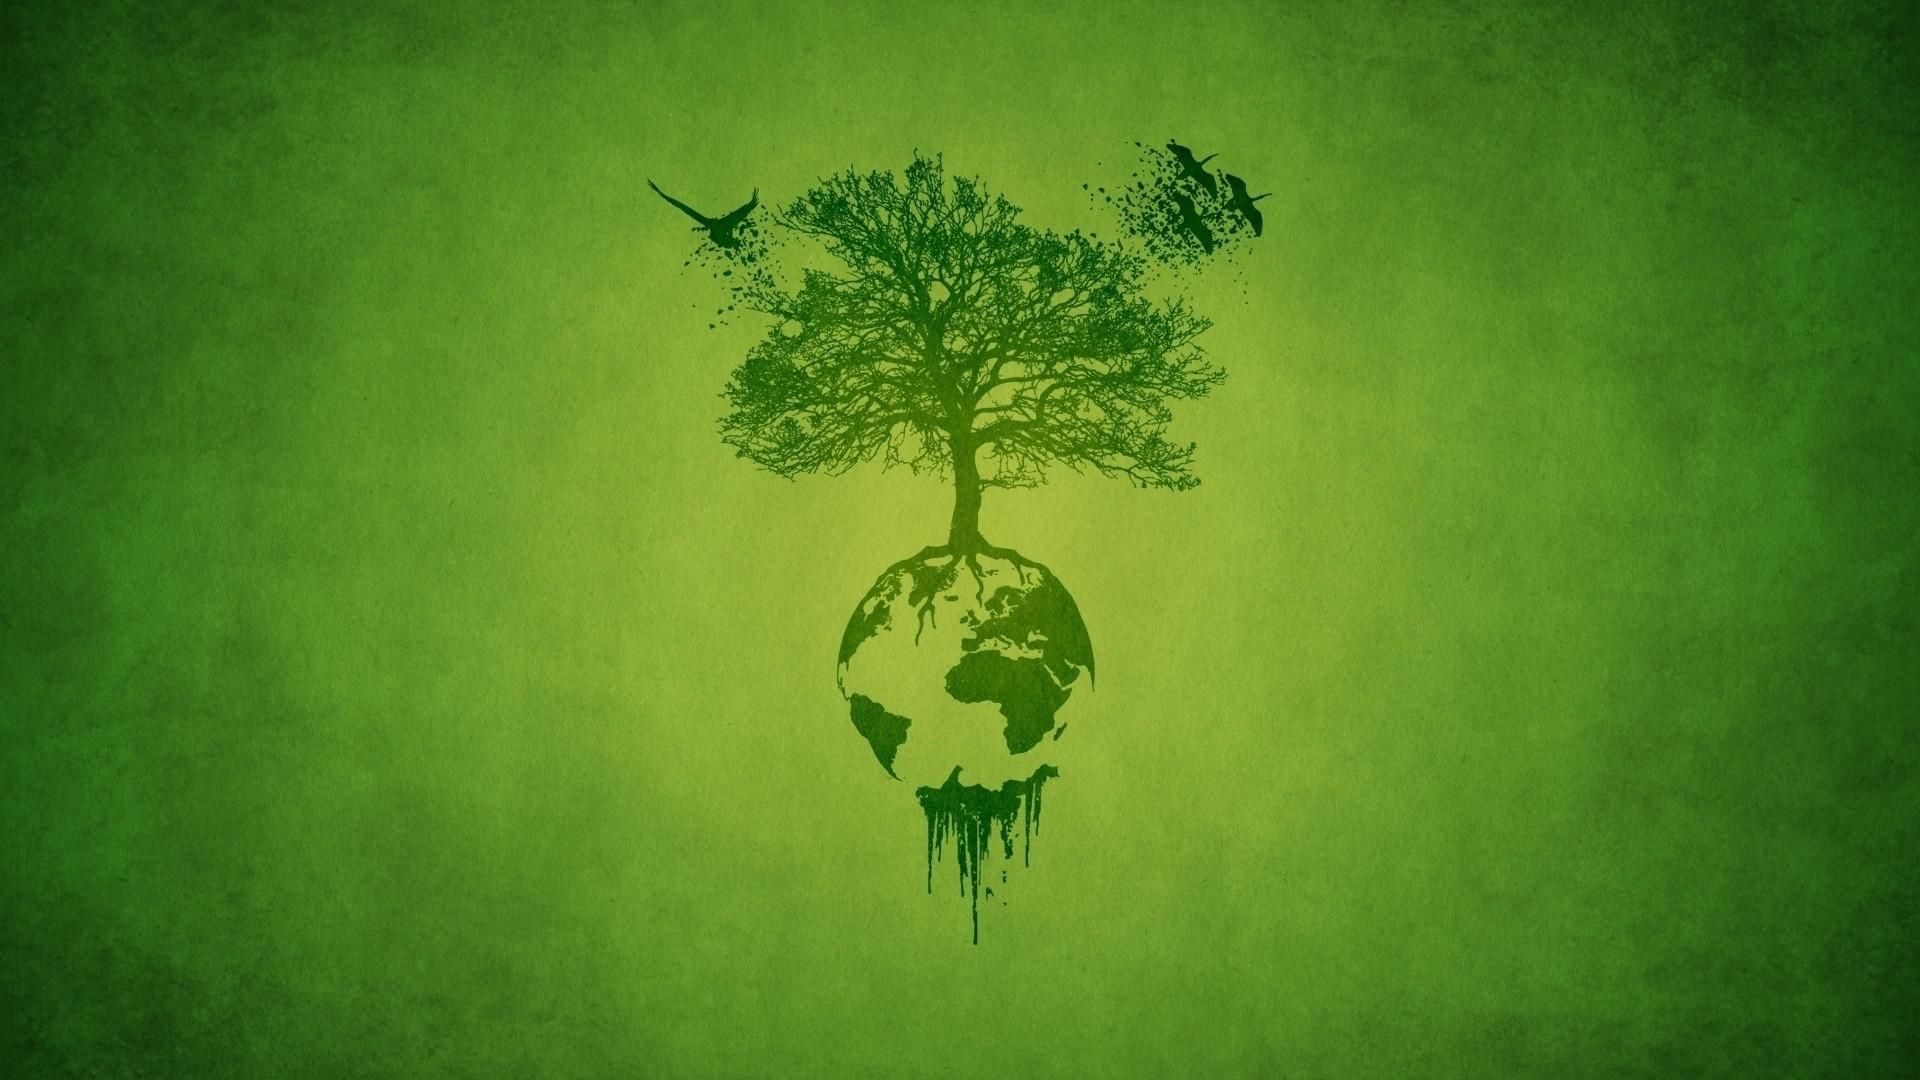 The earth is a tree wallpaper 1920x1080 - Earth